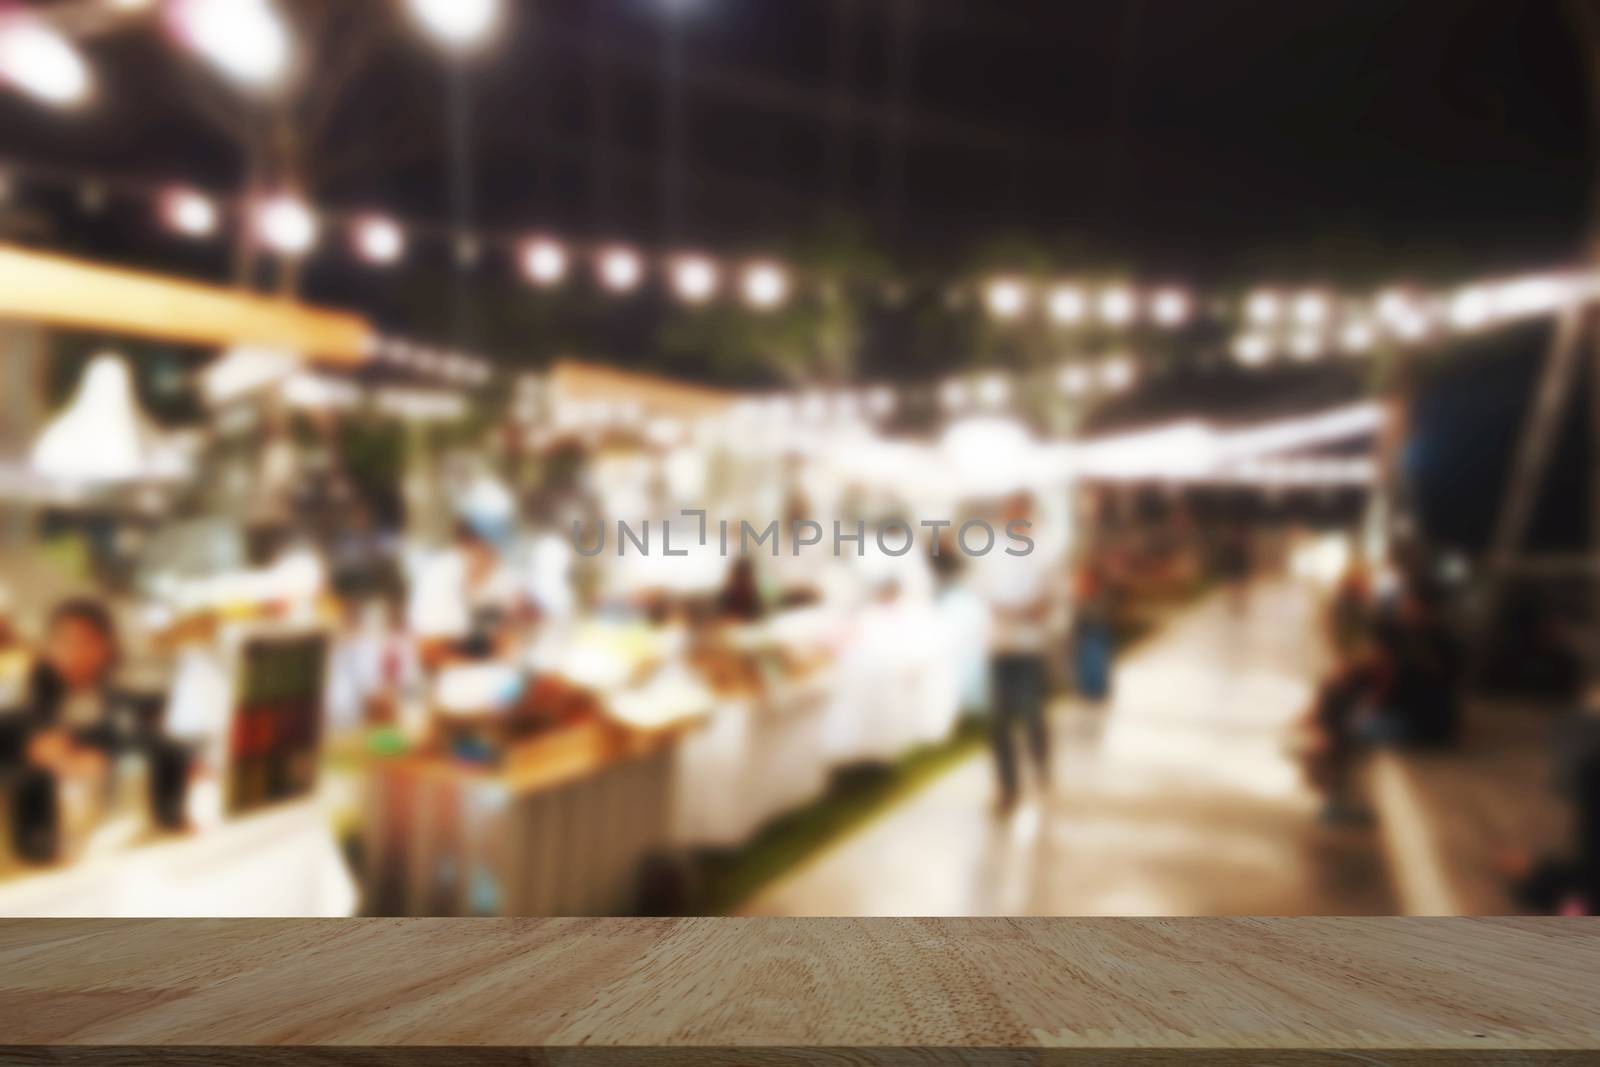 Table Top And Blur restaurant of The night market Background                                                   